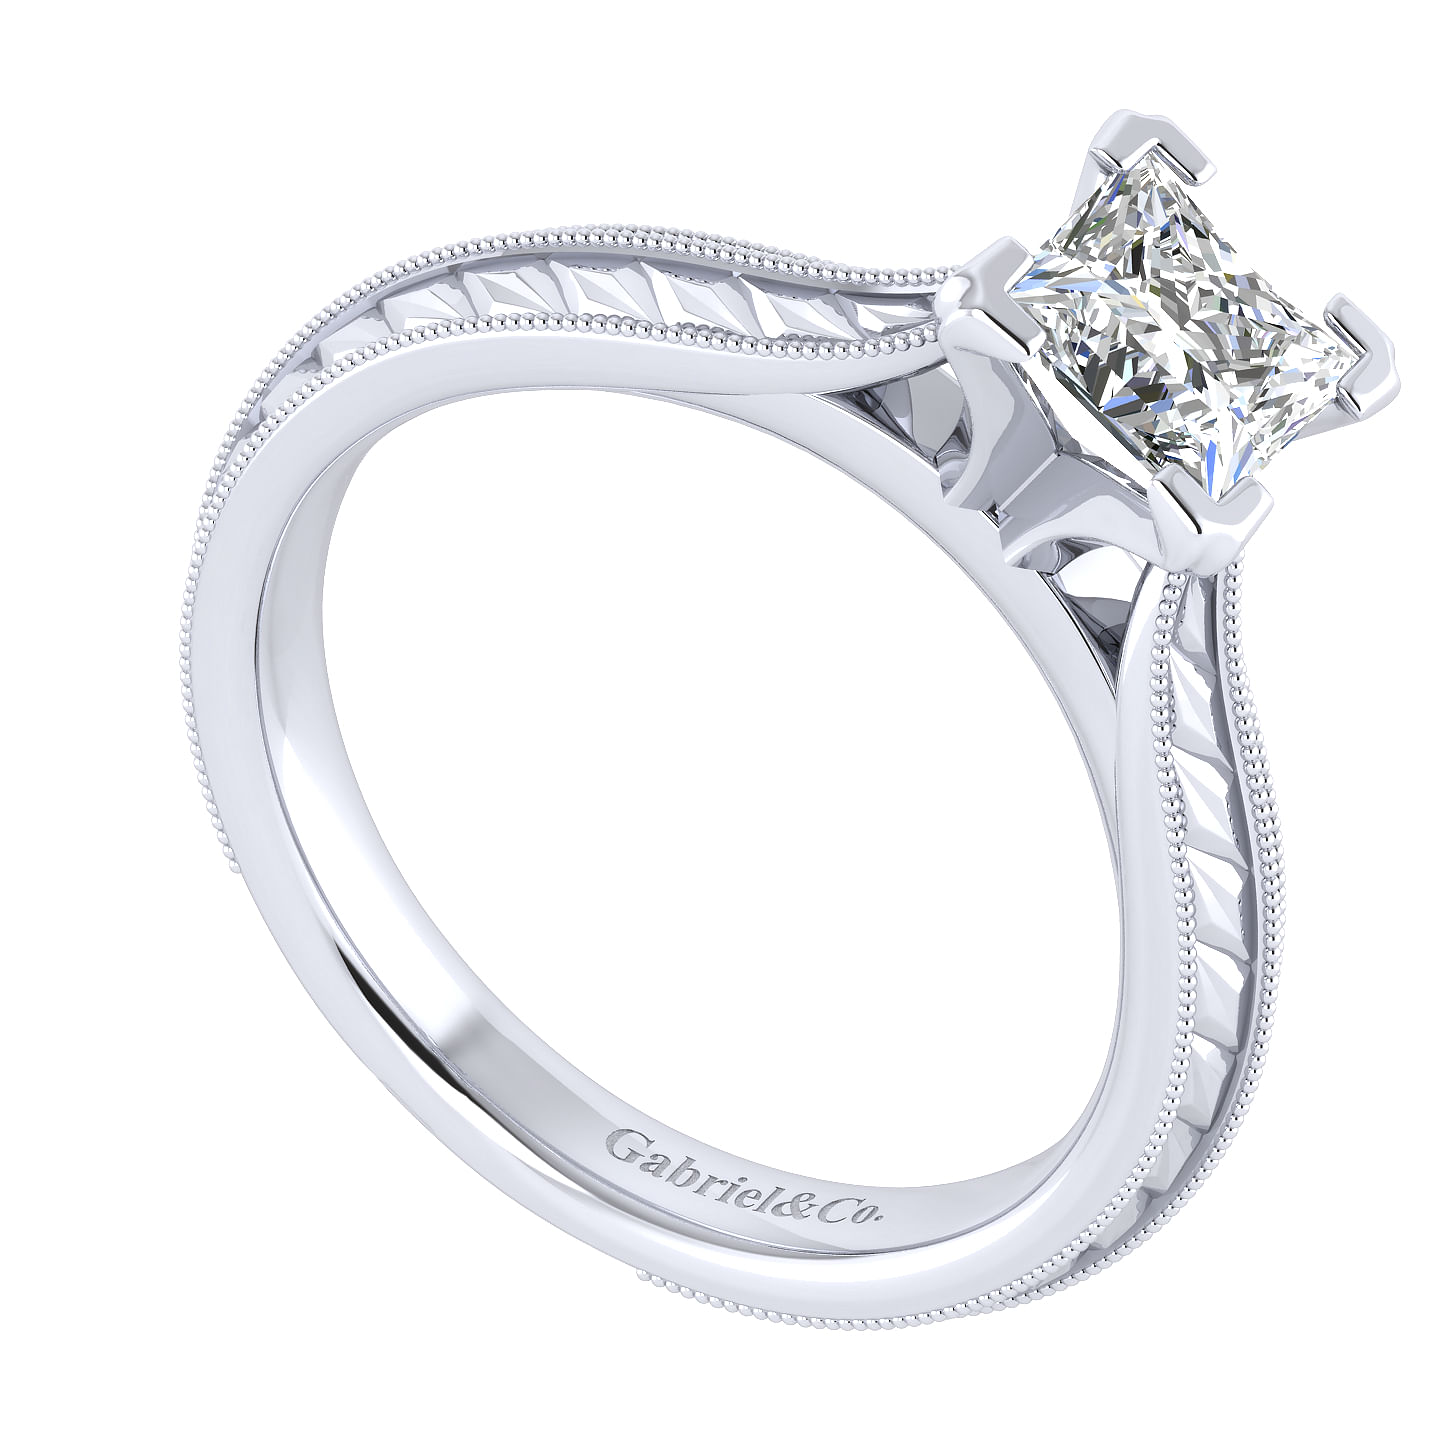 Vintage Inspired 14K White Gold Princess Cut Solitaire Engagement Ring